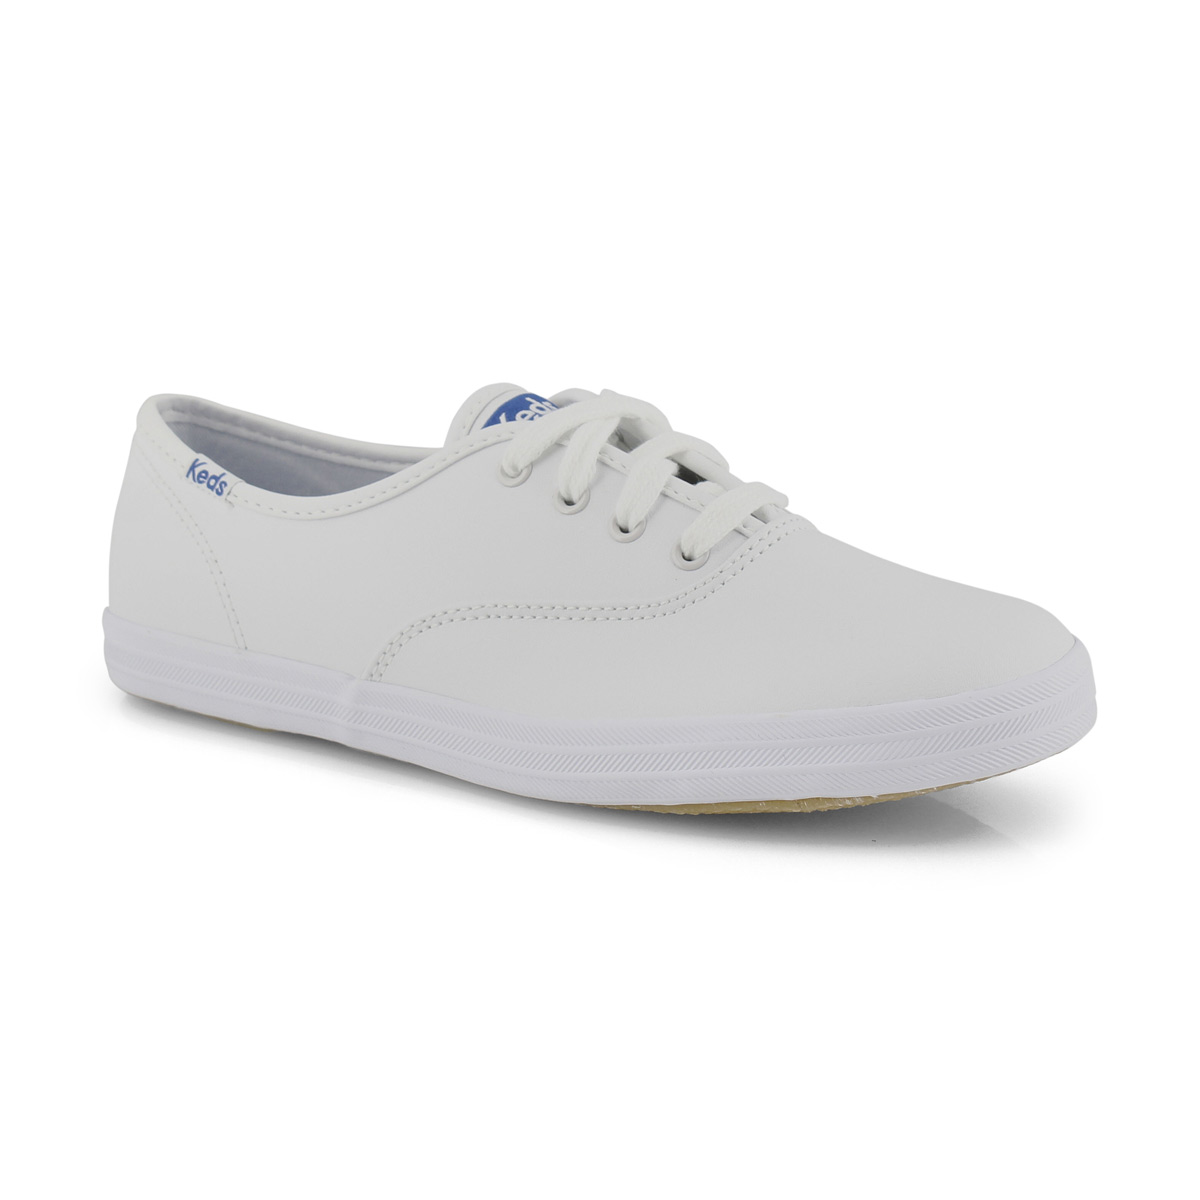 champion white leather shoes